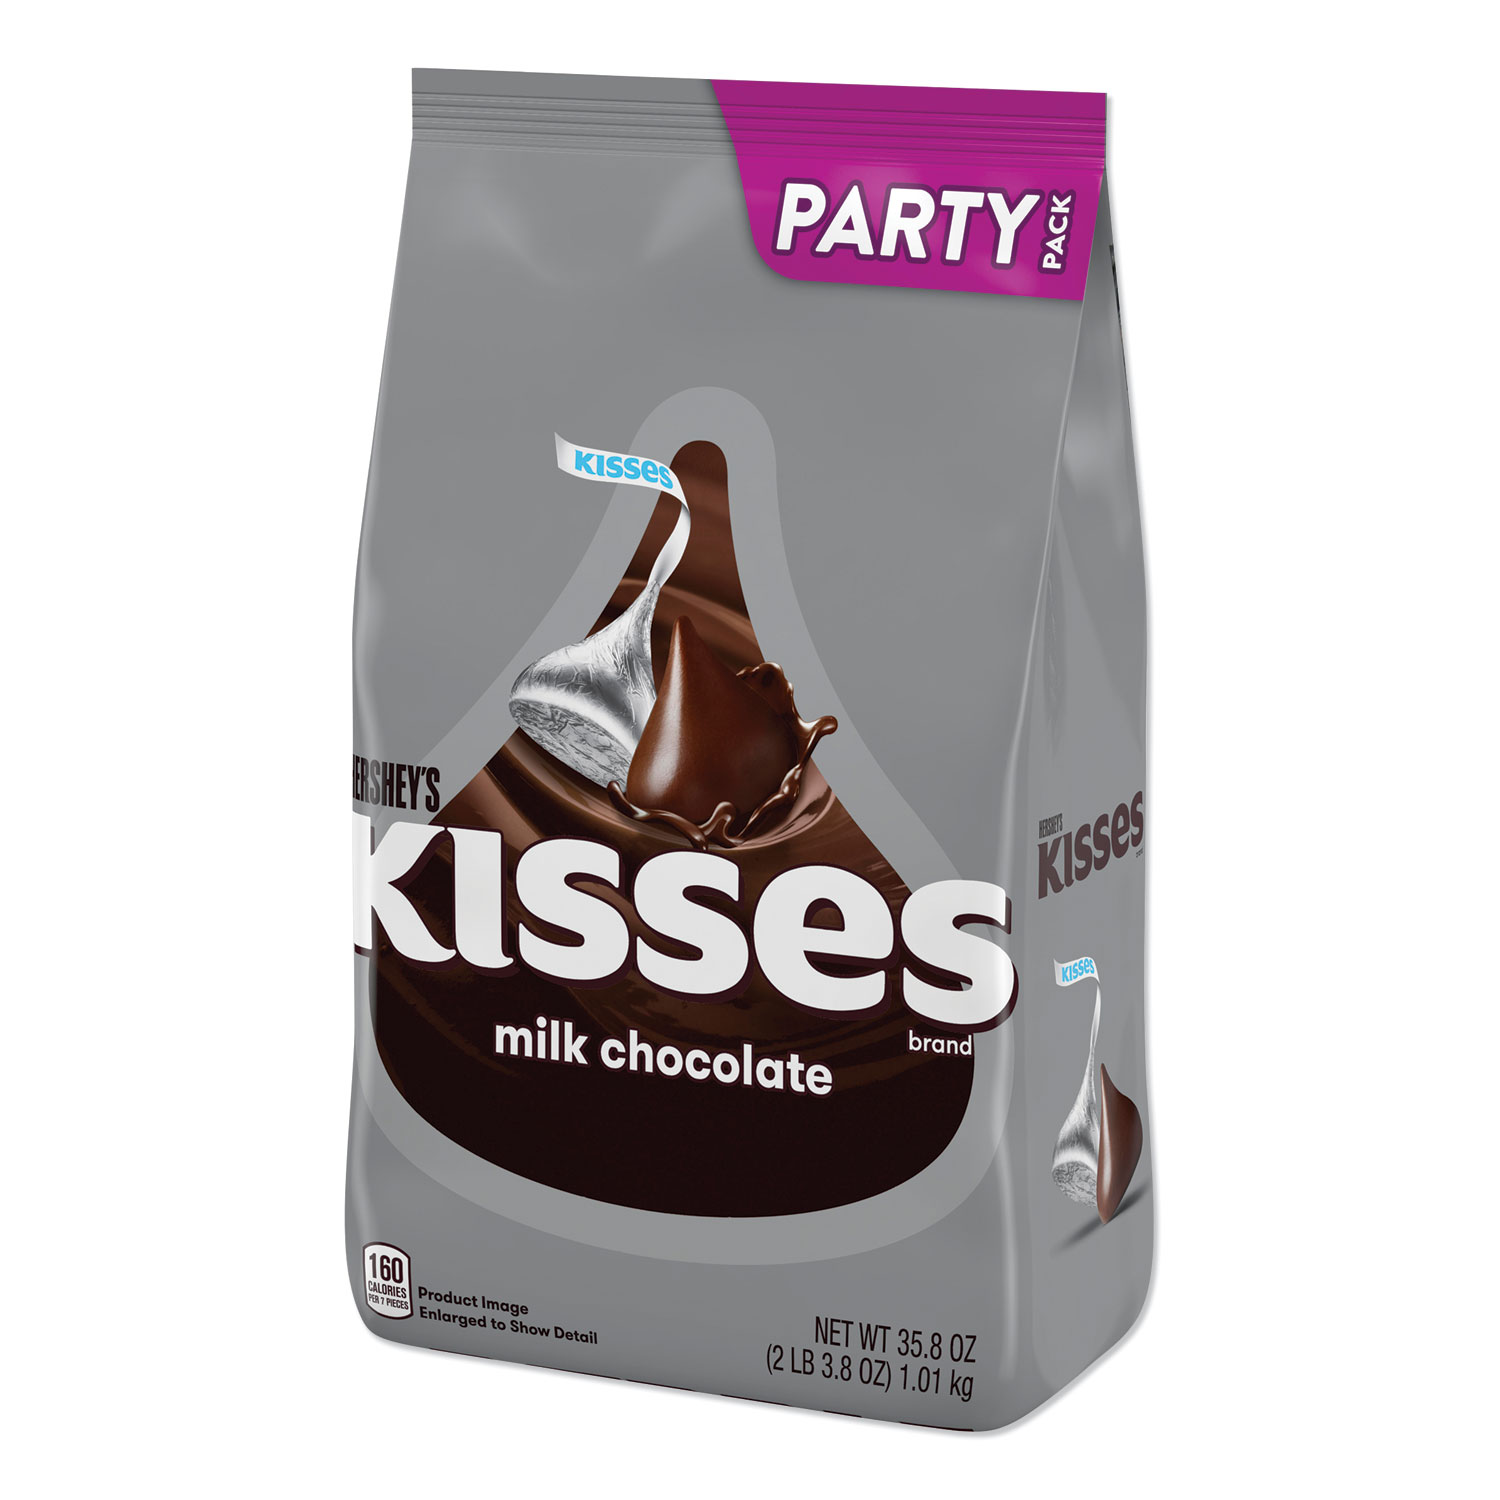  Hershey's HEC13480 KISSES, Milk Chocolate, Silver Wrappers, 35.8 oz Bag (HRS2411695) 